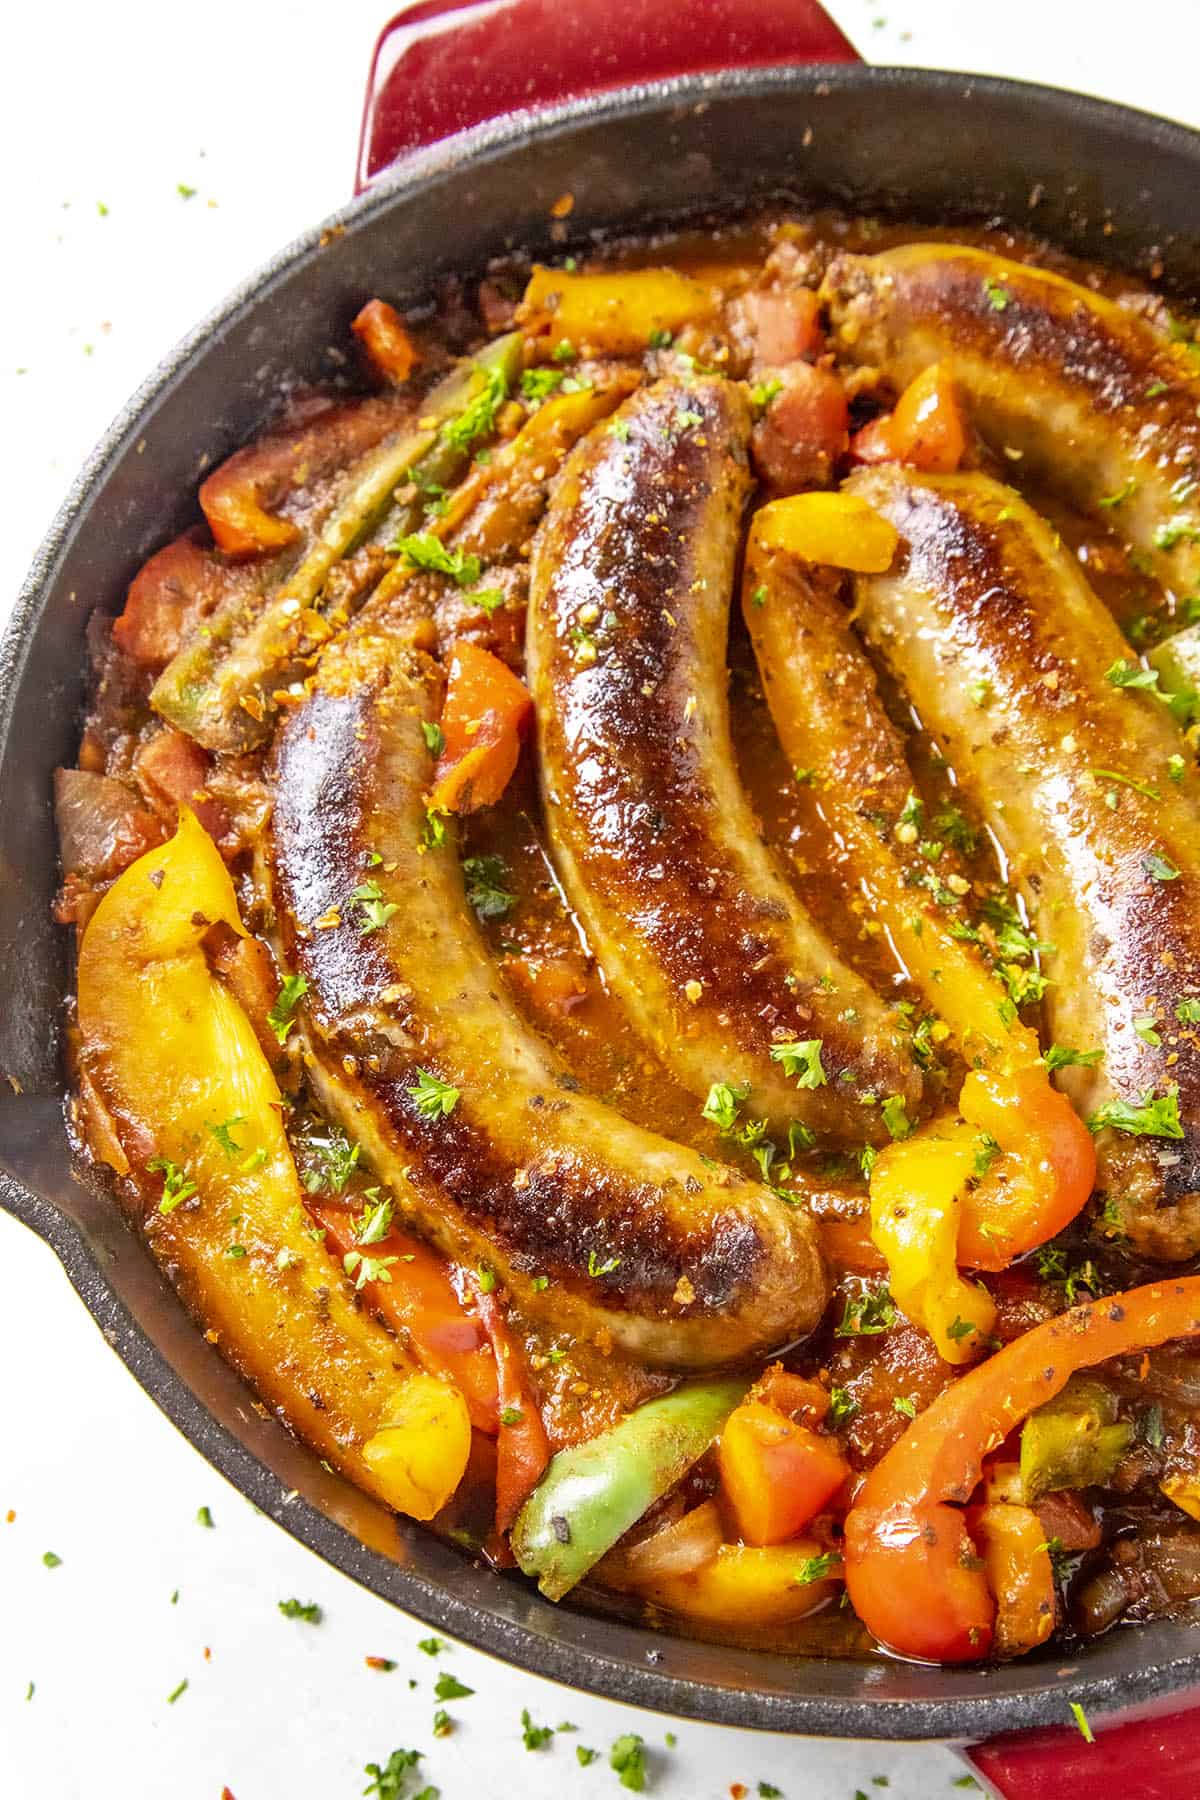 Sausage and Peppers in a hot pan with chili flakes and chopped green herbs